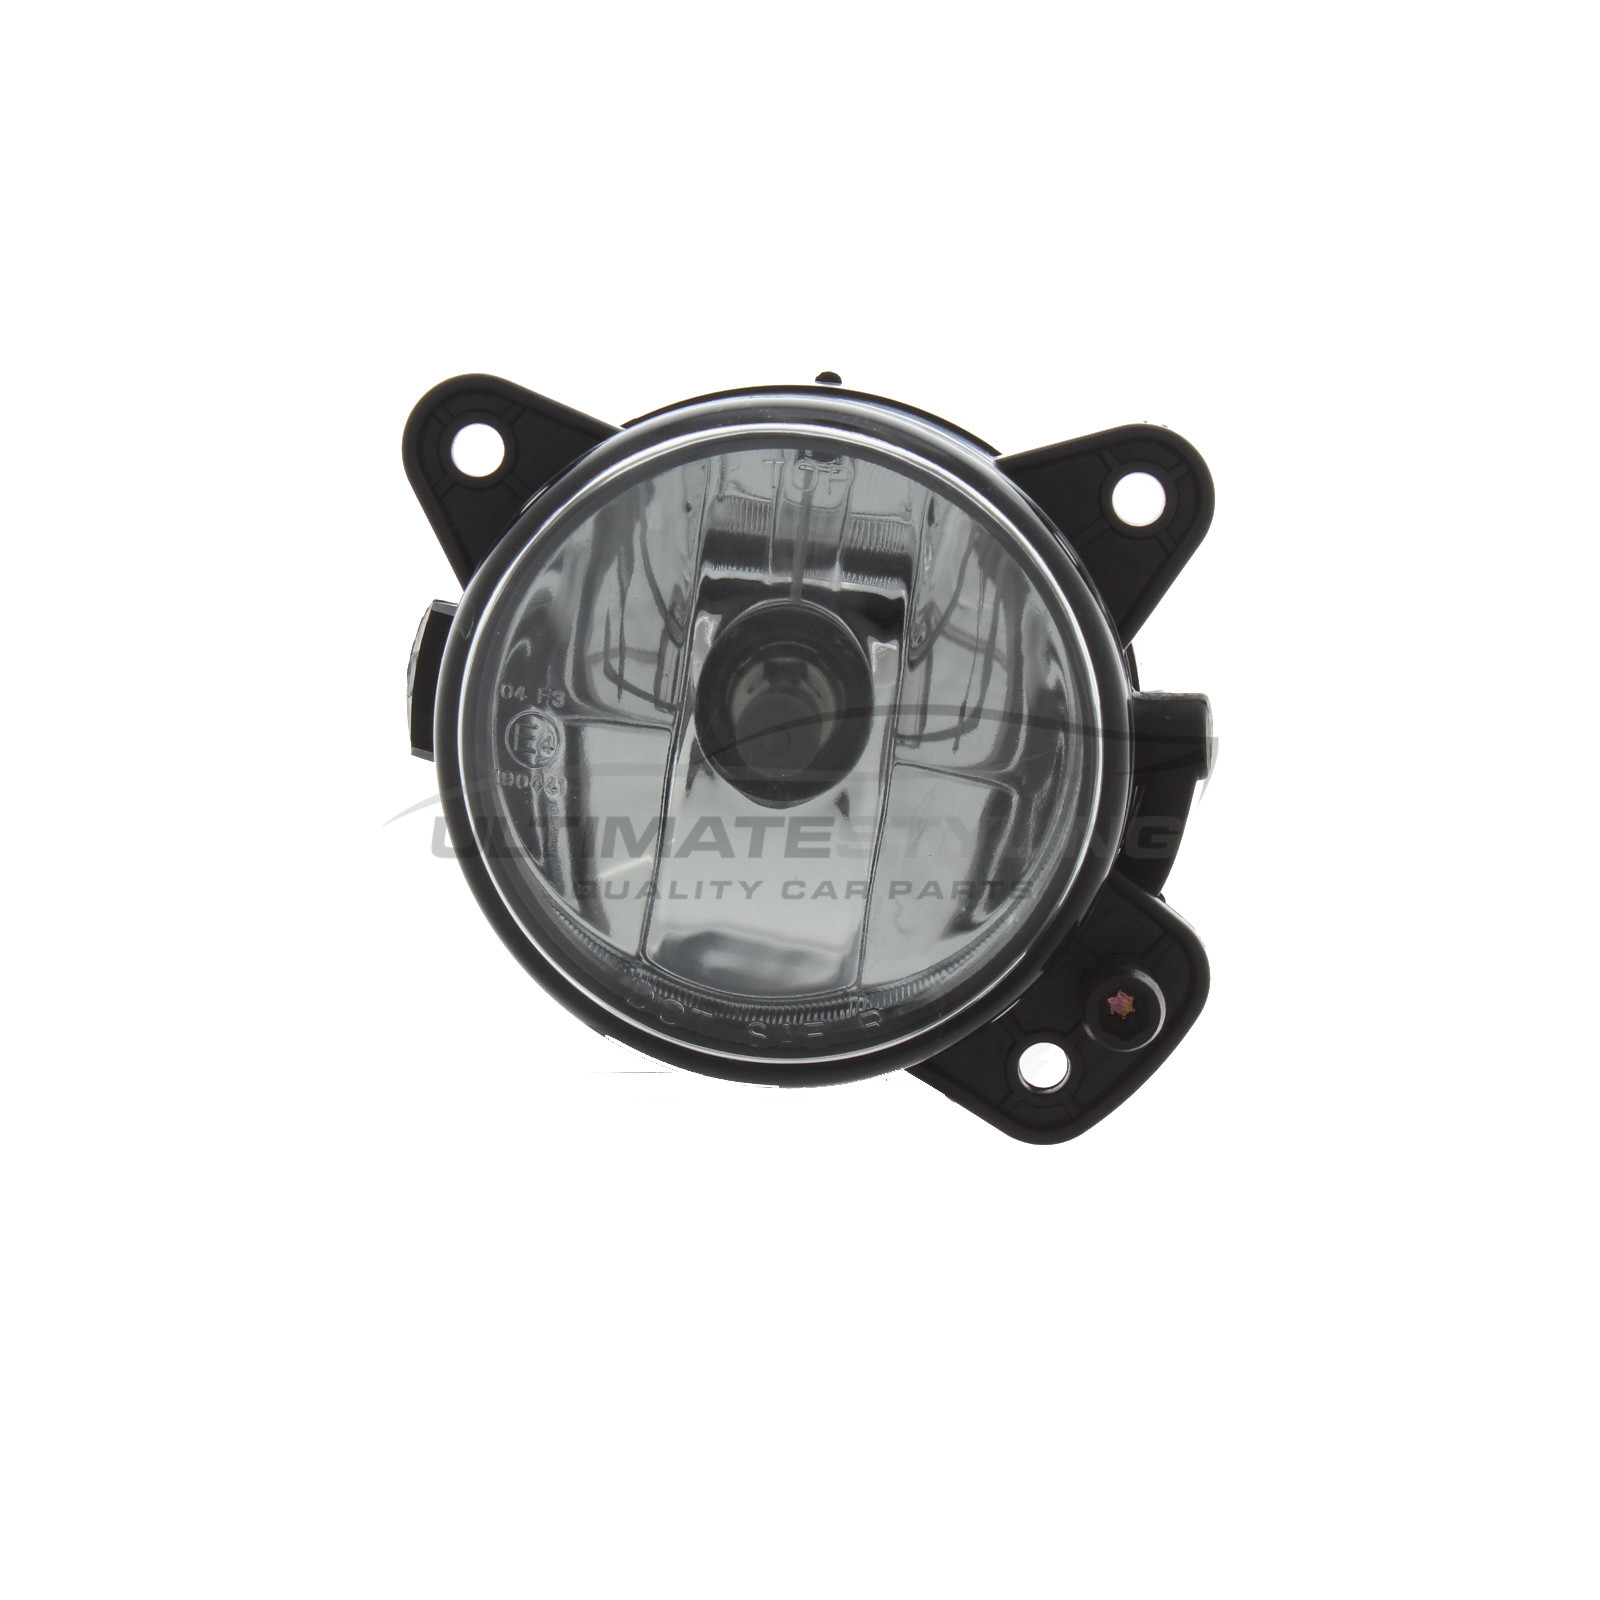 Skoda Fabia / Roomster, VW Caravelle / Crafter / Polo / Transporter Front Fog Light - Drivers Side (RH) - Non-LED